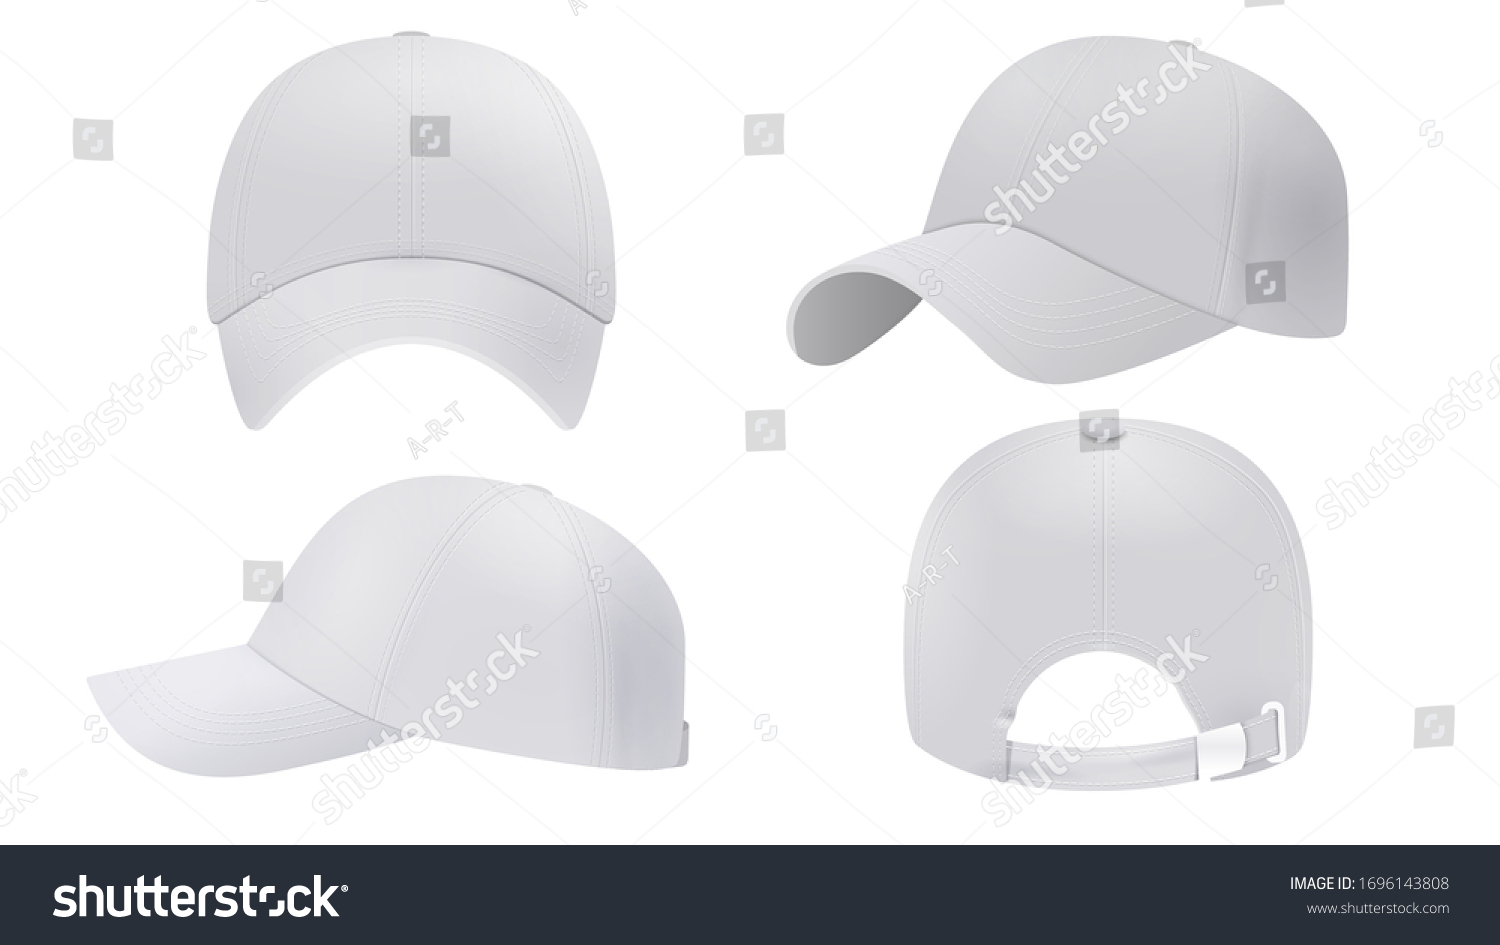 SVG of White cap Mockup, realistic style. Hat blank template, baseball caps, vector illustration set. Collection of modern realistic fashion accessories,headgear,headwear, headdress svg